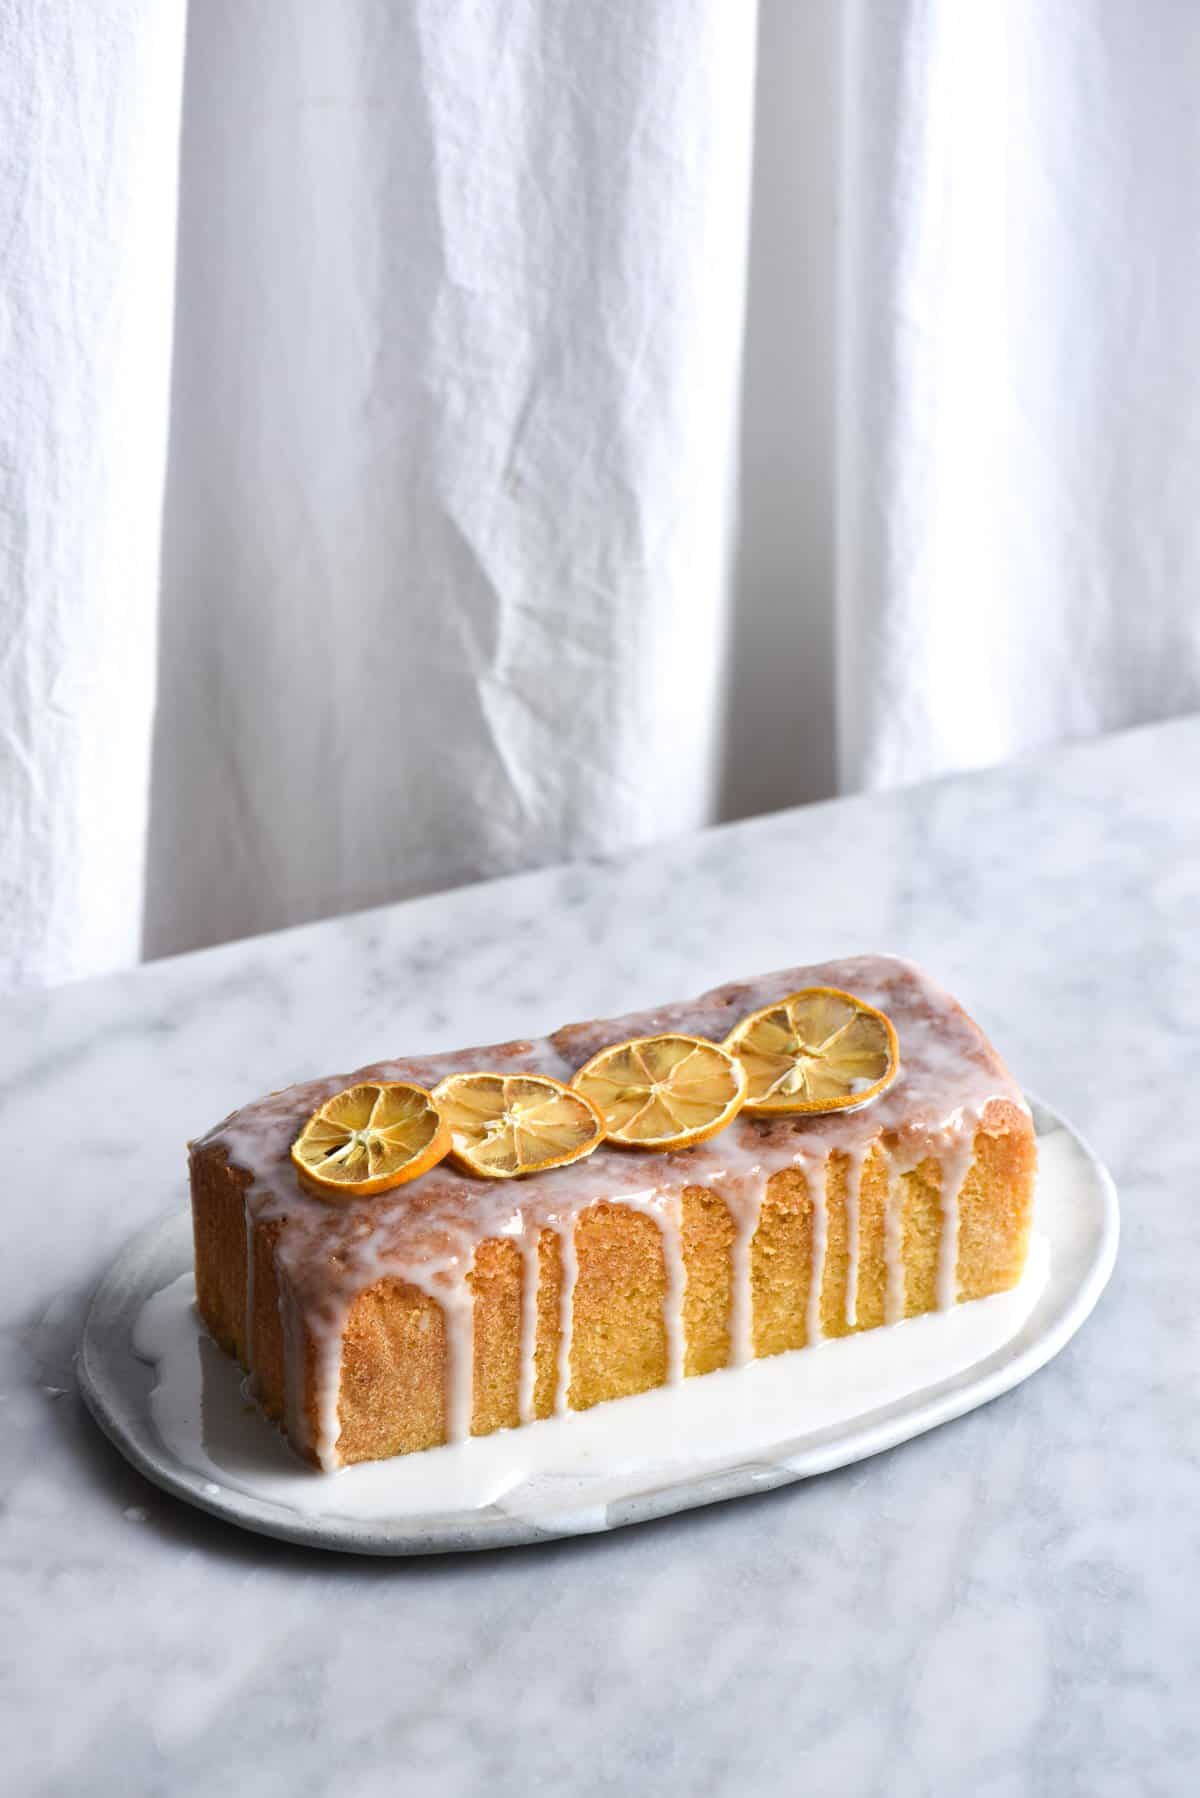 Gluten free lemon drizzle cake loaf with dripping lemon icing against a white marble backdrop